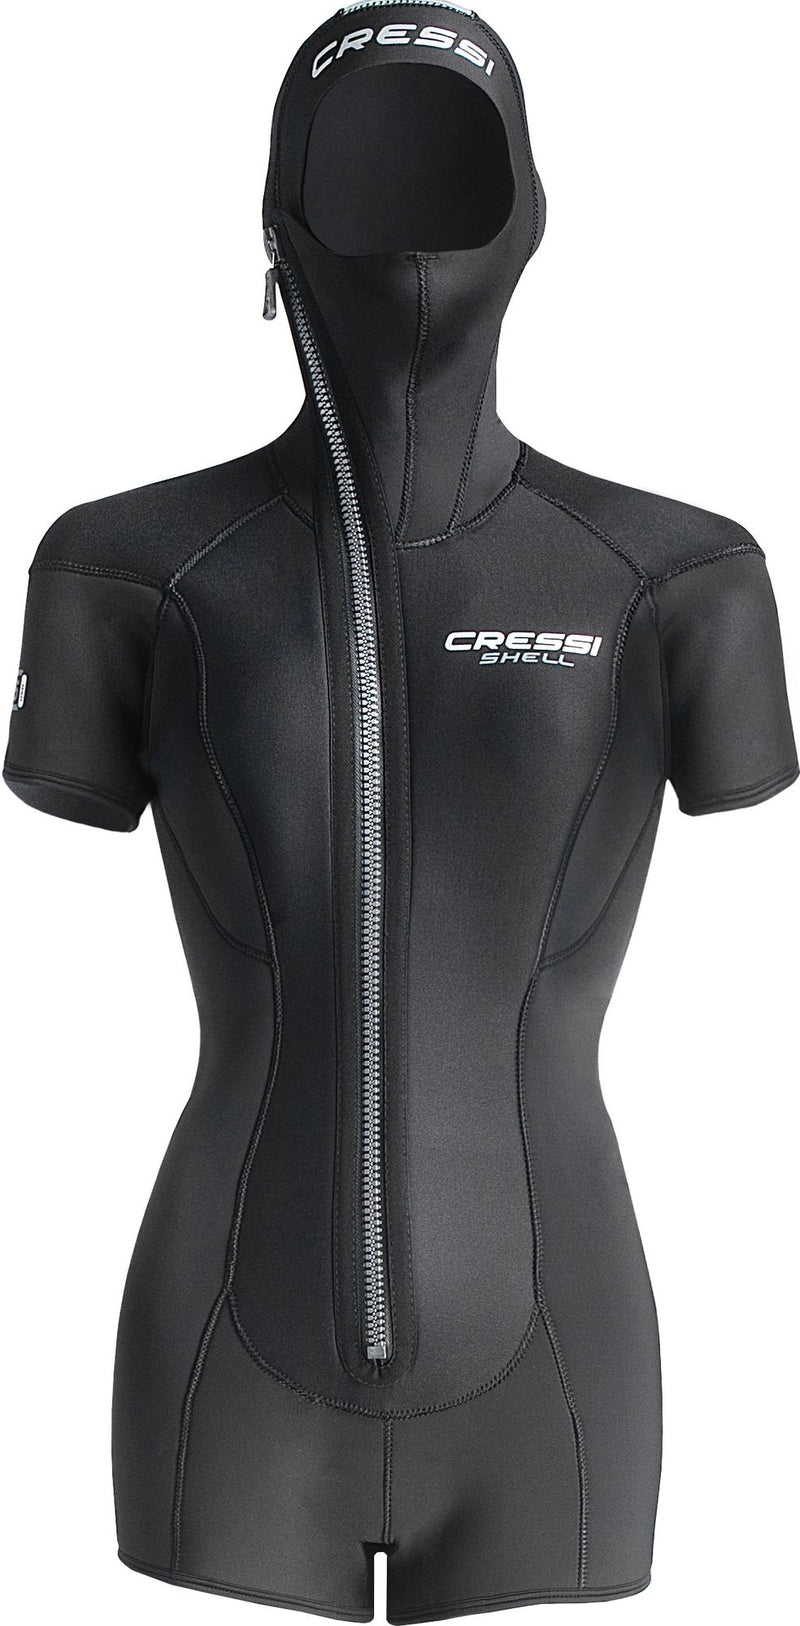 Cressi Shell Oversuit Jacket Lady sovramuta donna spiaggia immersion subacque apnea nuoto pesca corpett scuba diving spearfishing freediving snorkeling & beach paddling swimming neoprene vest undersuit wetsuit accessor oversuit lady